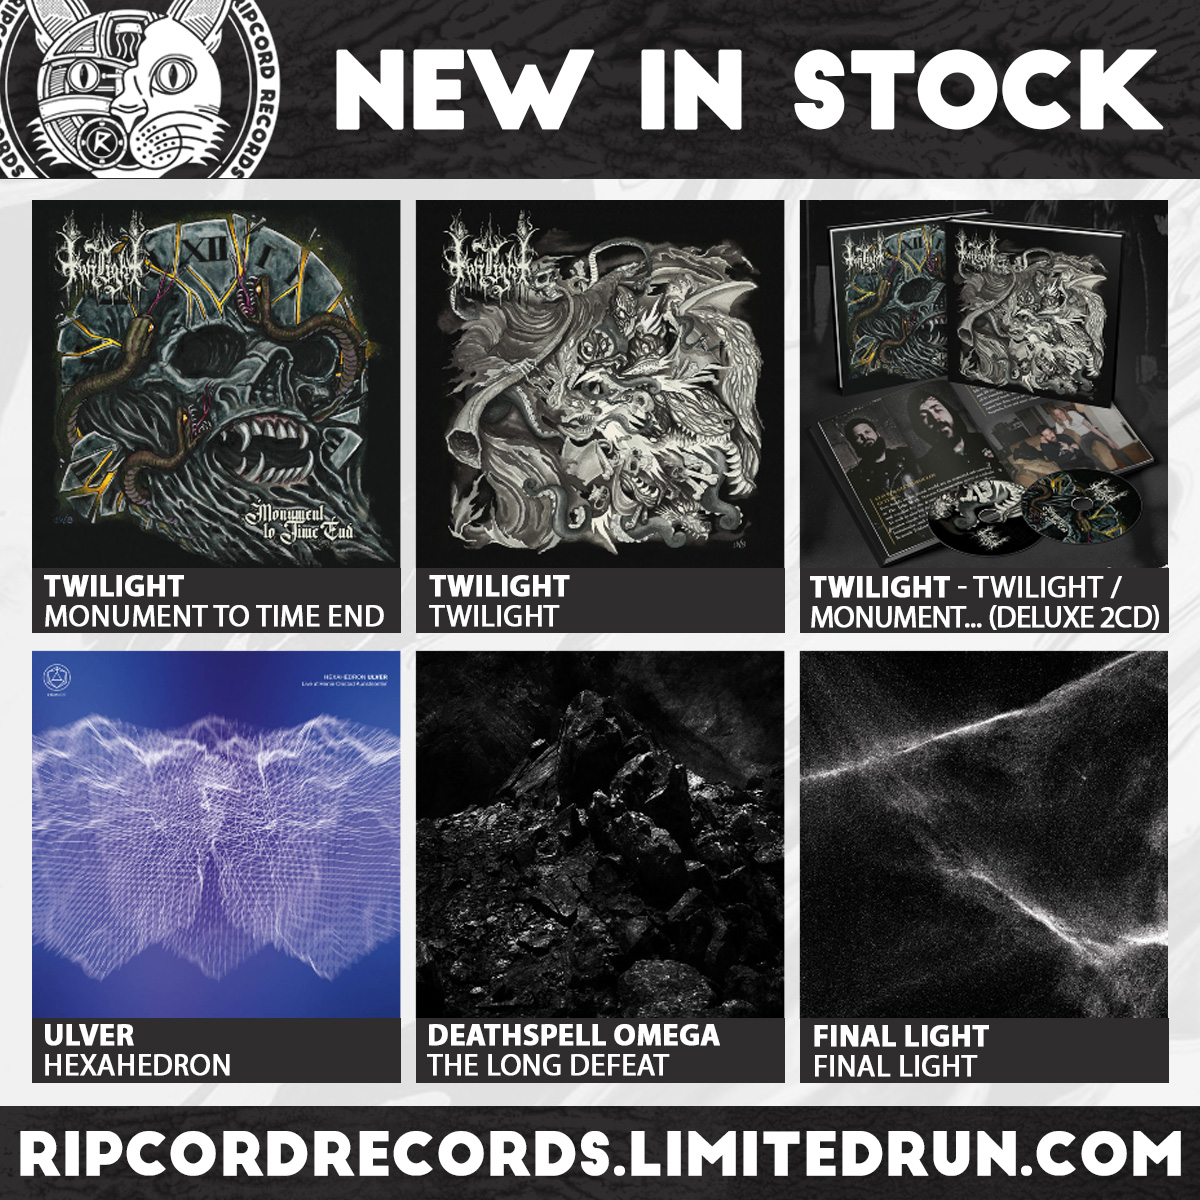 More records in stock including a very cool deluxe 2CD from Twilight. ripcordrecords.limitedrun.com